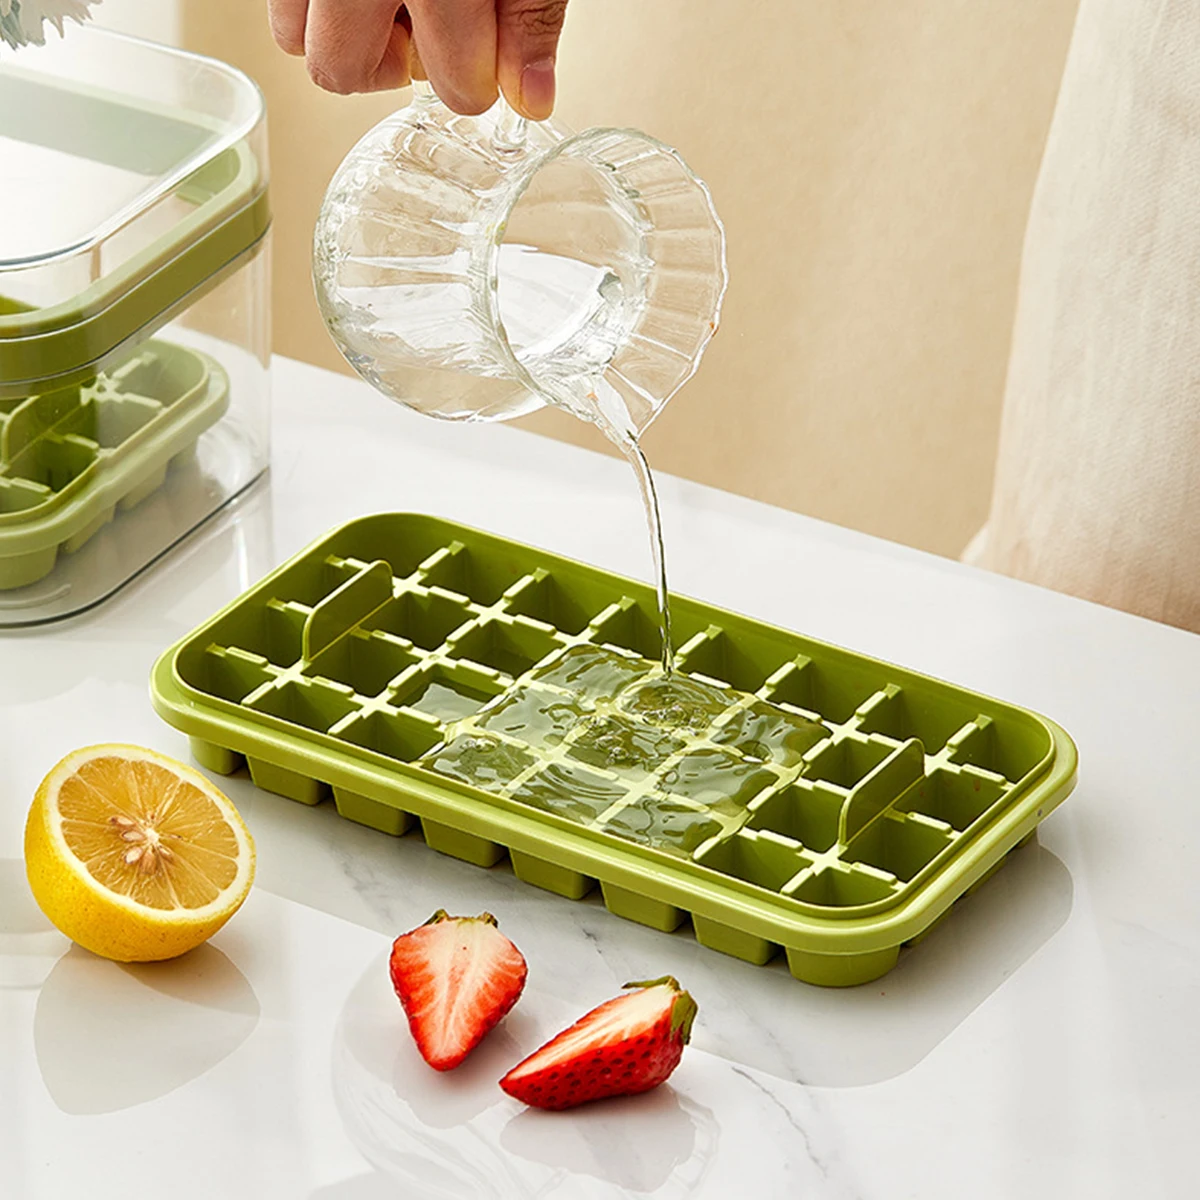 https://ae01.alicdn.com/kf/S94672b502c3b40cf92c185f7d132e08eM/Ice-Ball-Maker-Press-Type-Silicone-Ice-Buckets-With-Lid-Molds-Ice-Cube-Trays-Wisky-Round.jpg